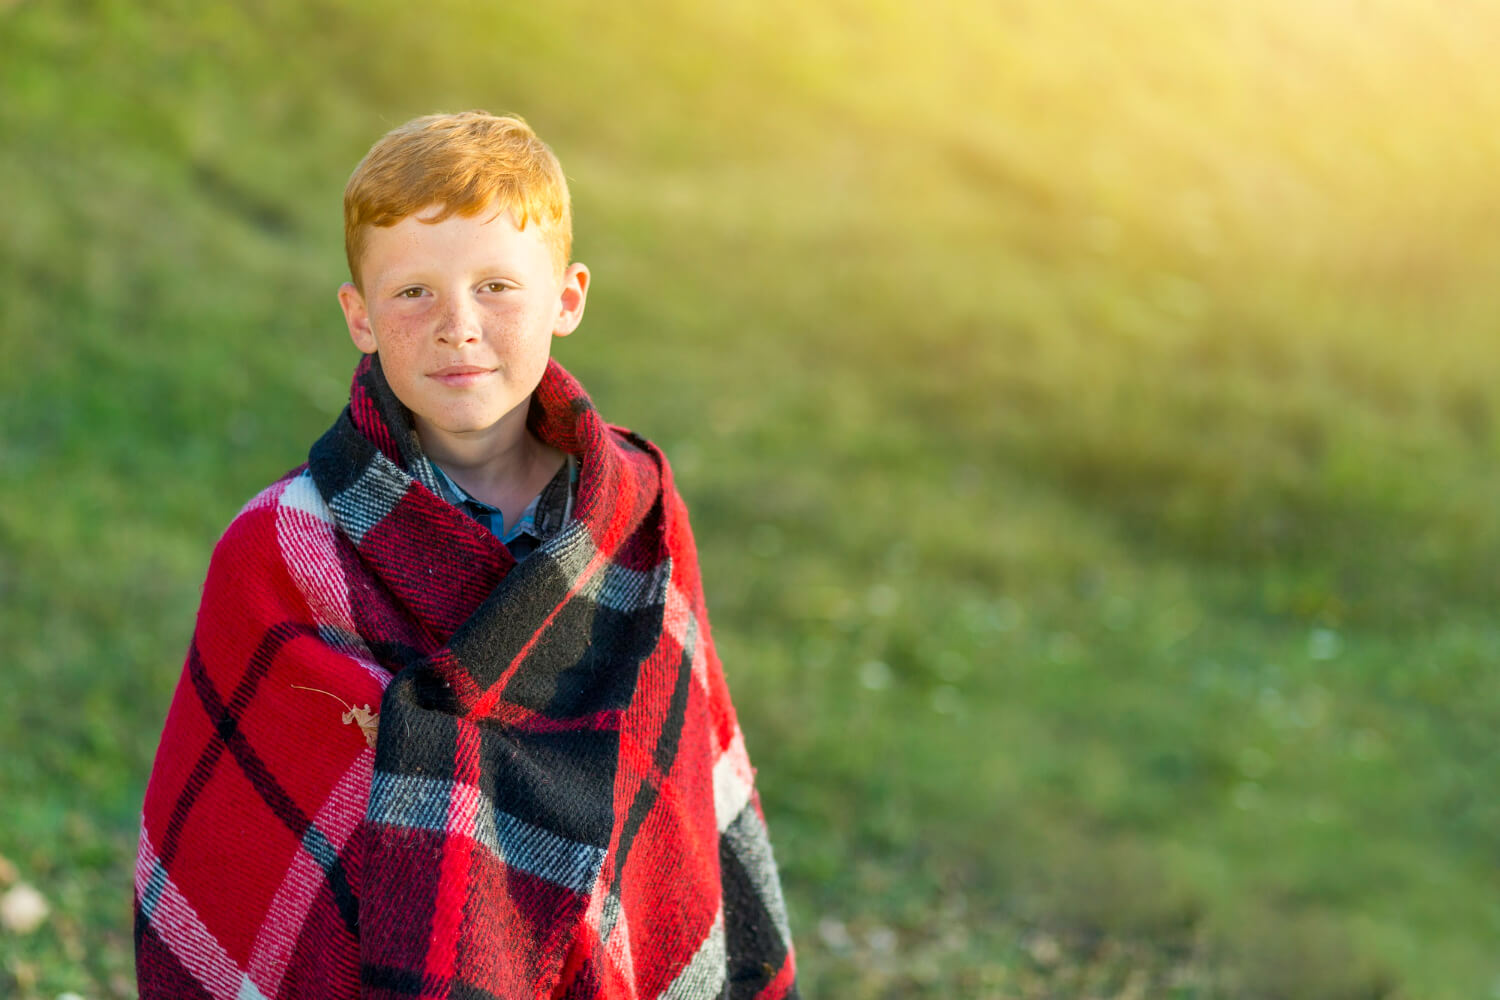 A red-headed boy wrapped in a red plaid blanket, standing on a grassy hill.